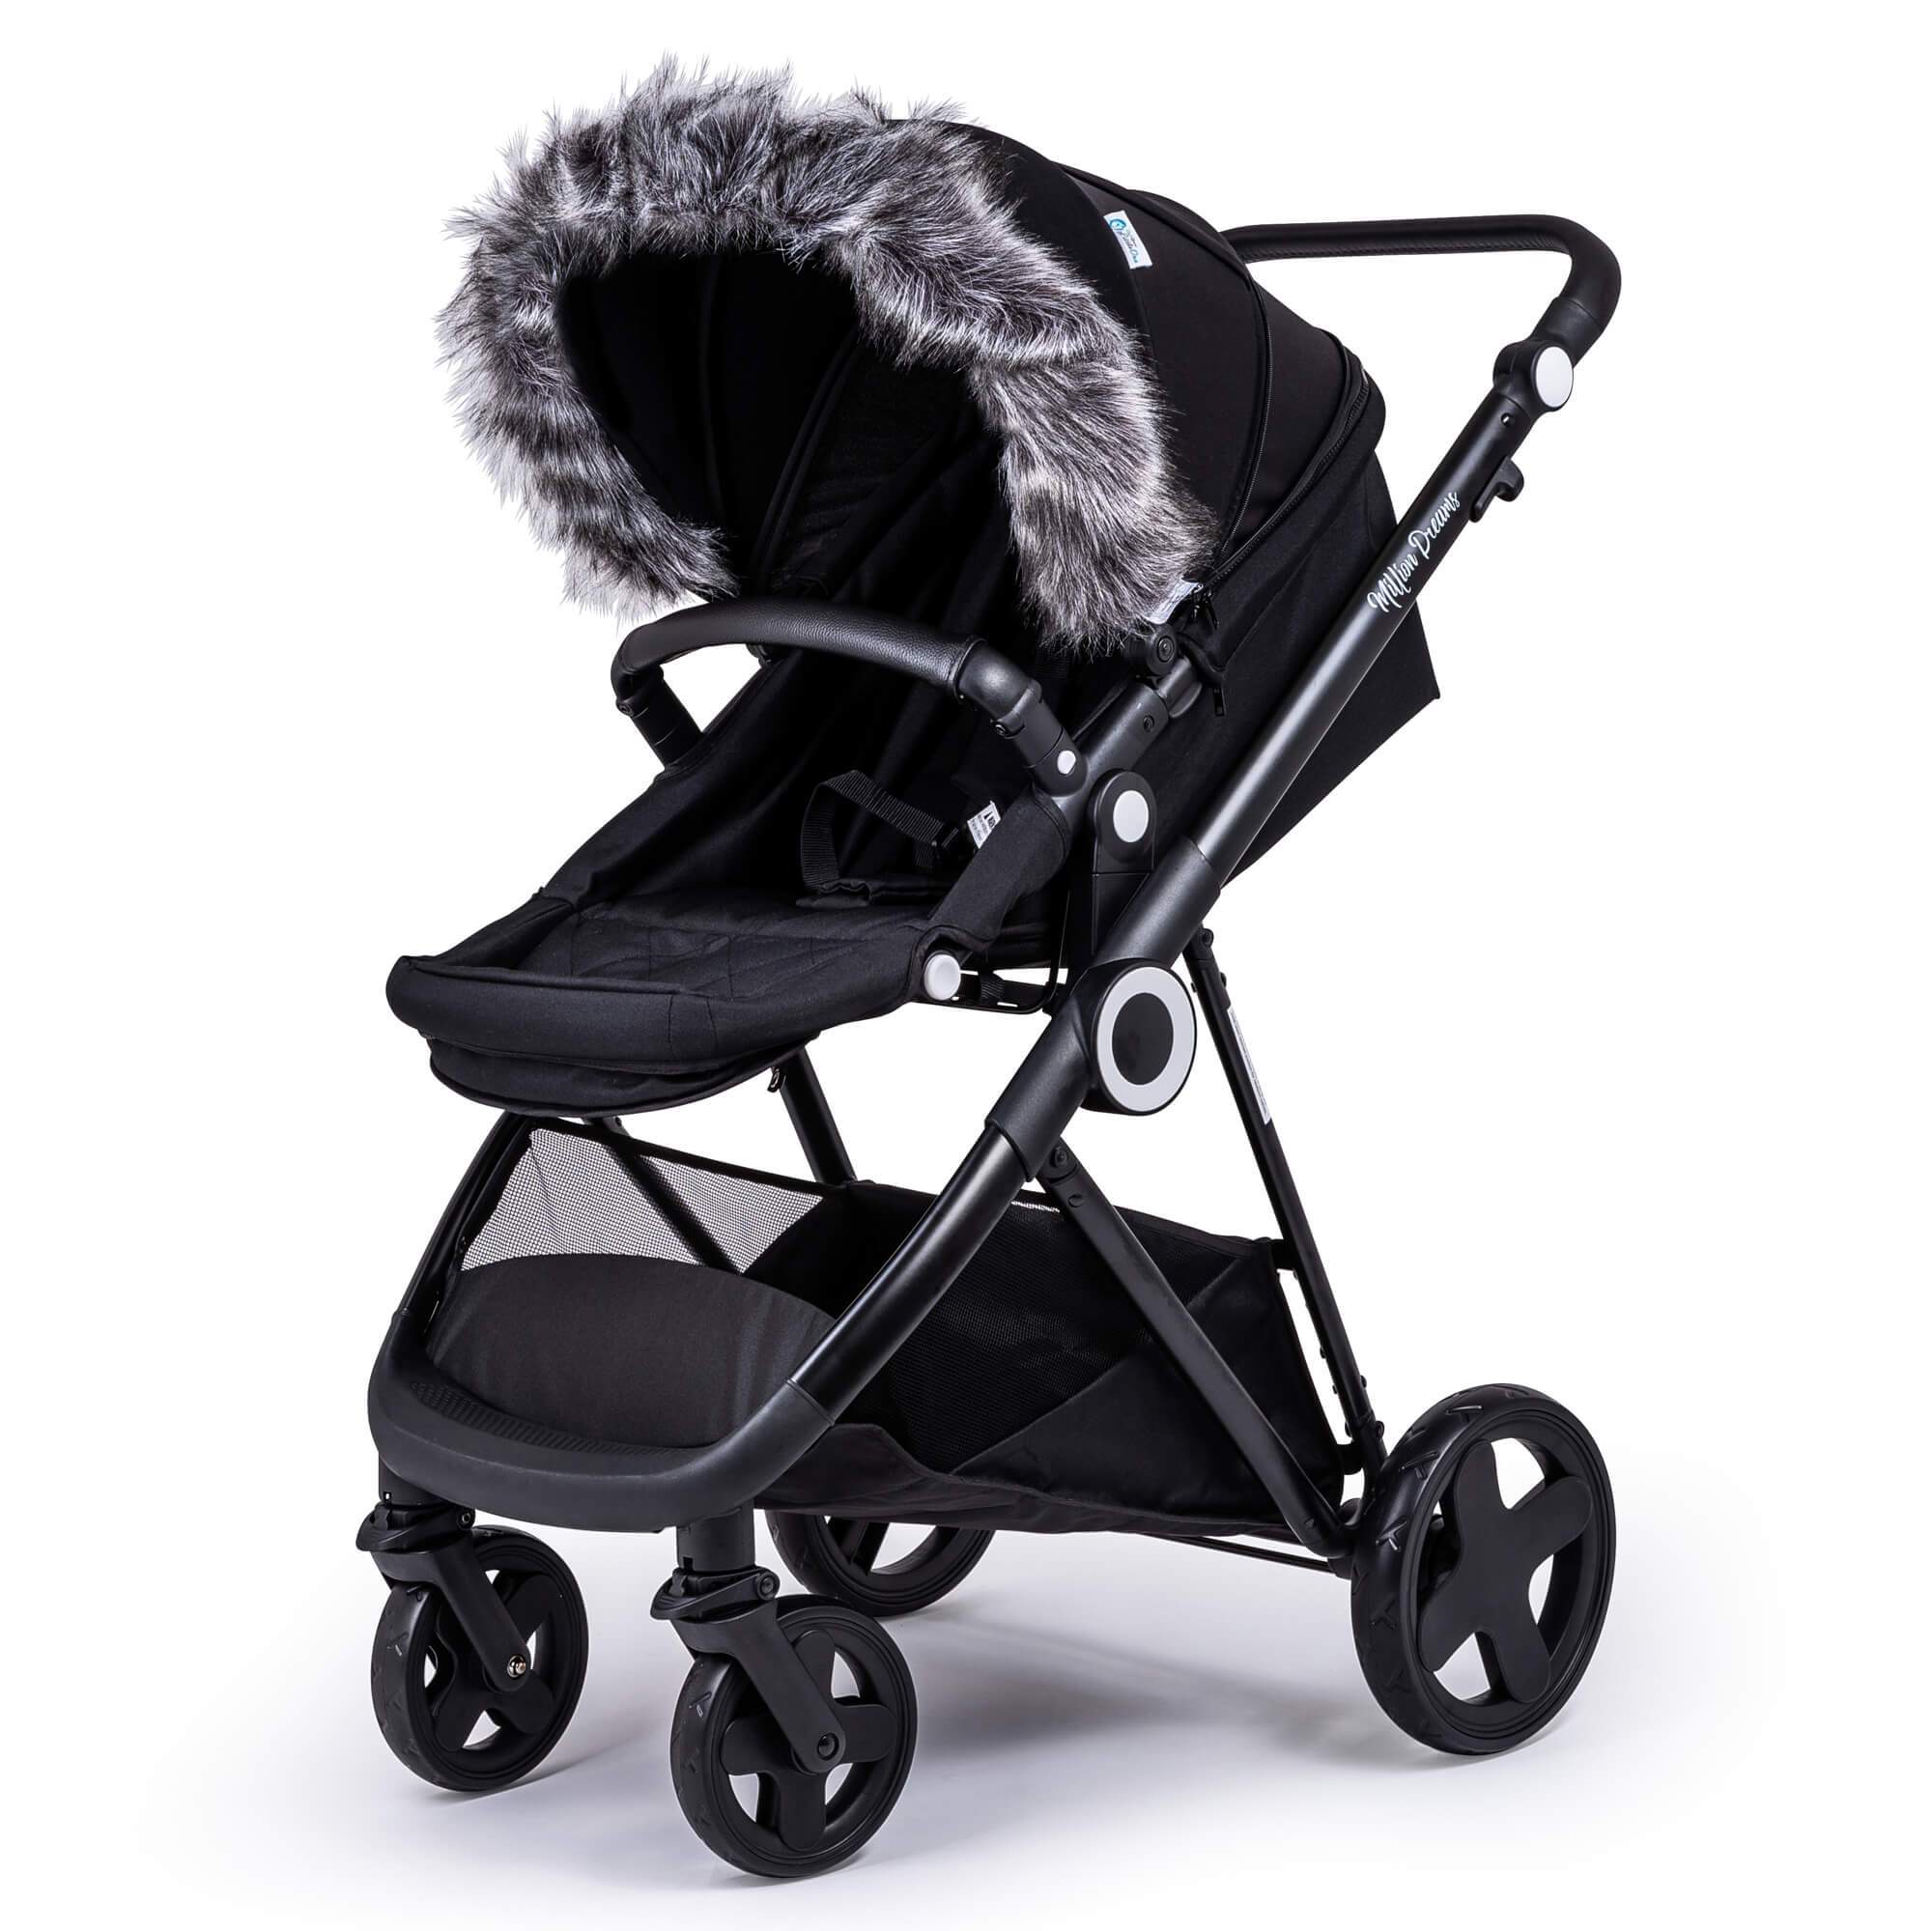 Pram Fur Hood Trim Attachment for Pushchair Compatible with Maclaren - Dark Grey / Fits All Models | For Your Little One